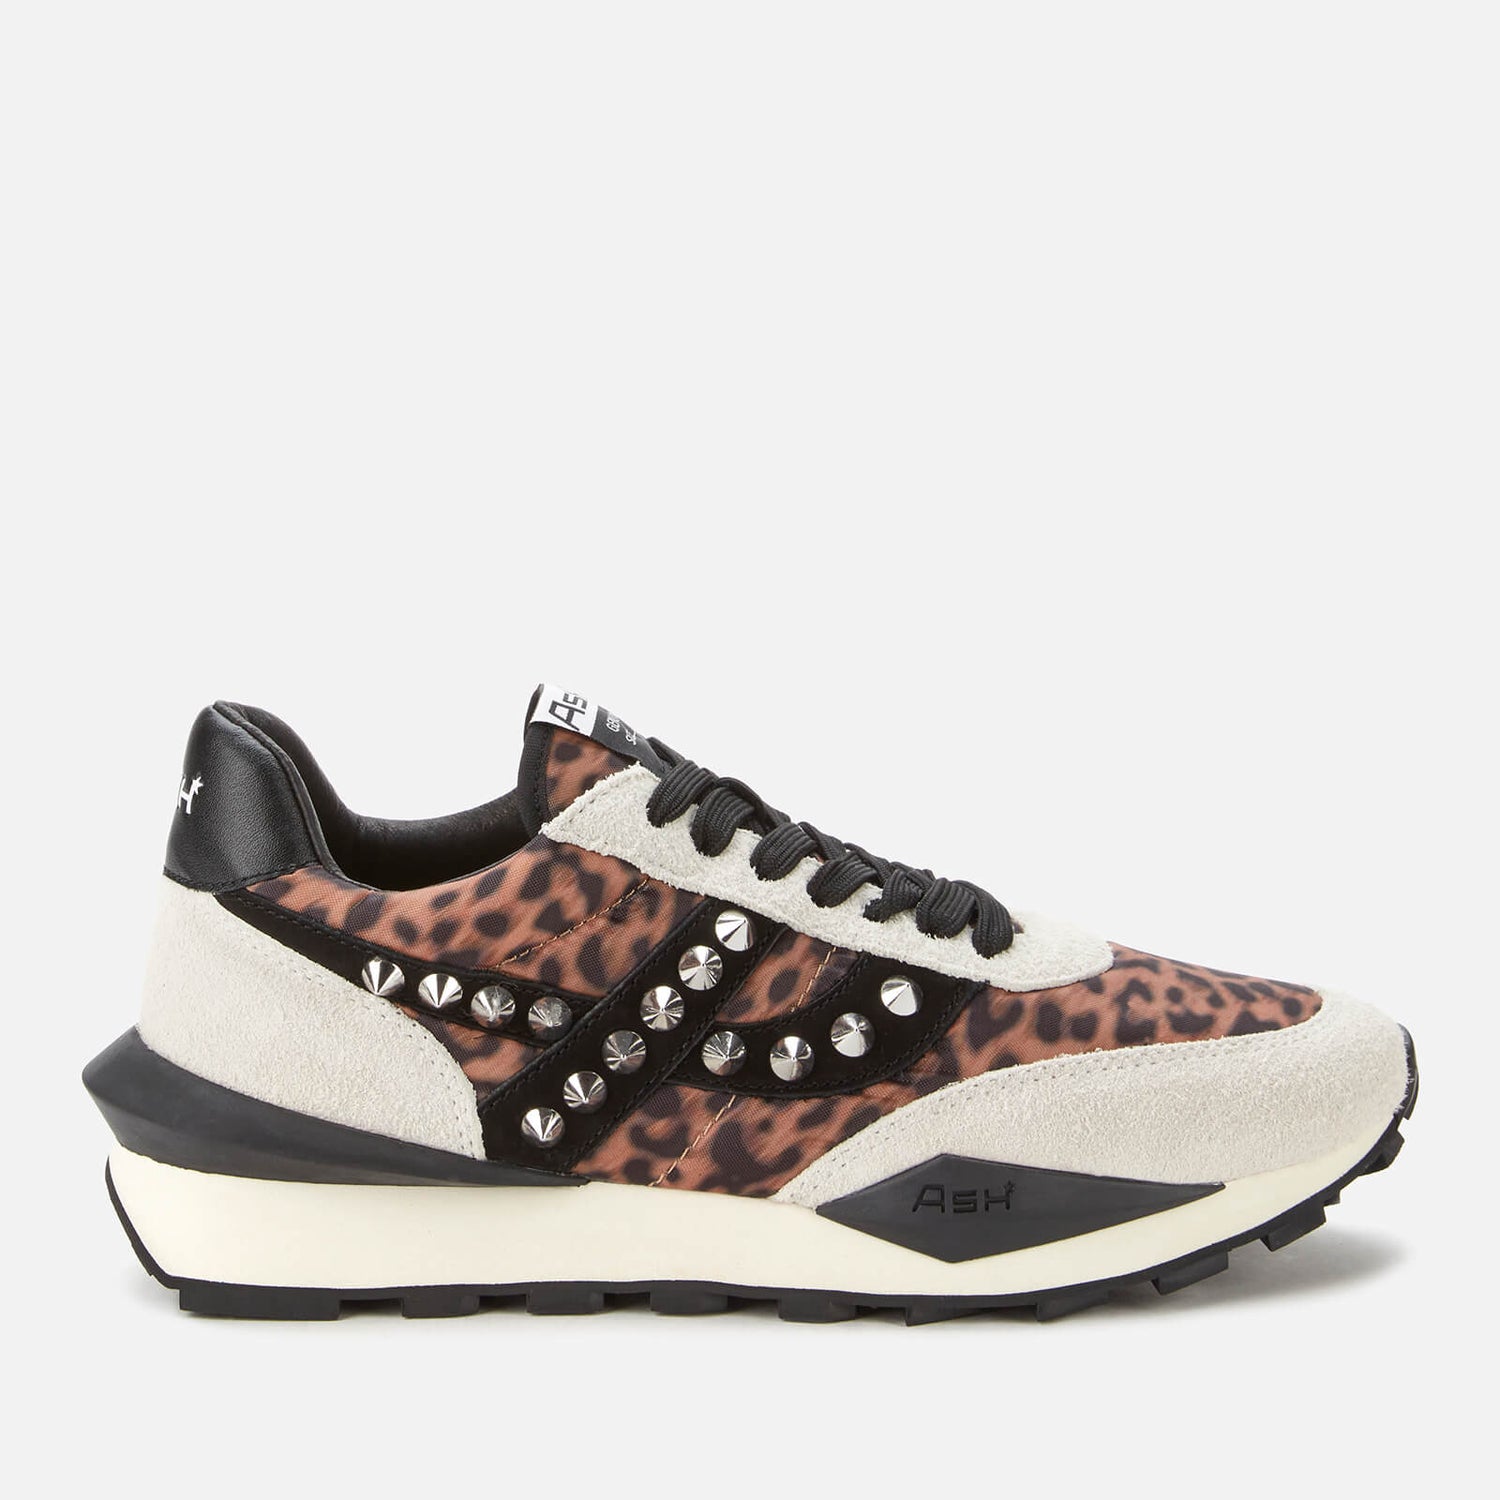 Ash Women's Spider Studs Sustainable Running Style Trainers - Off White/Beige/Black - UK 3